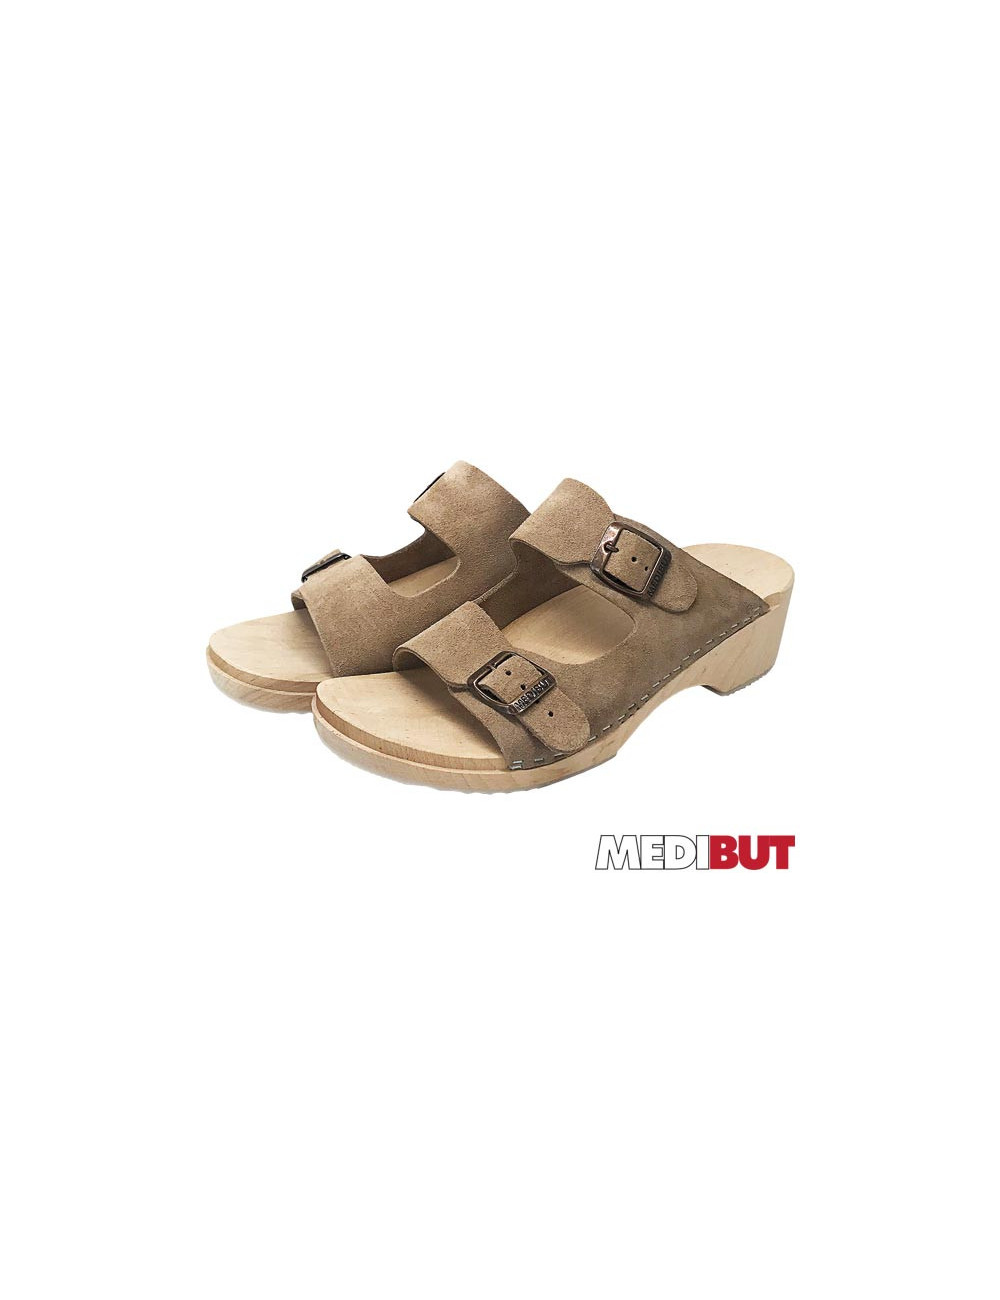 Occupational shoes bmdre2pasbe beige Medibut